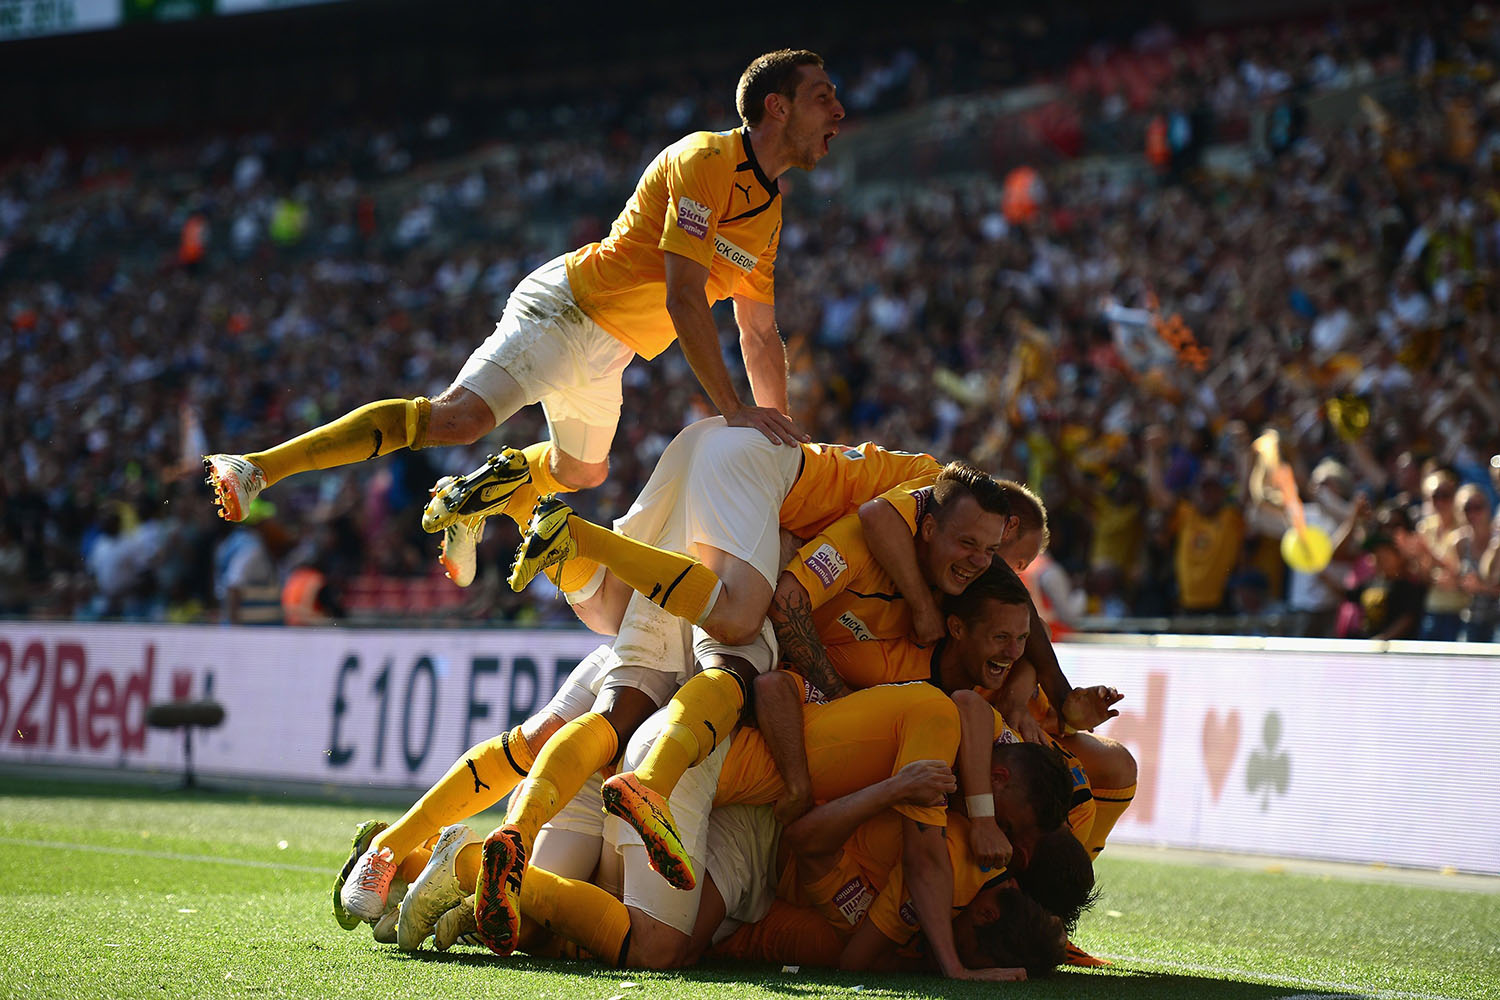 Ryan Donaldson of Cambridge United celebrates his goal with team mates during the Skrill Conference Premier Play-Offs Final between Cambridge United and Gateshead FC at Wembley Stadium in London, on May 18, 2014.